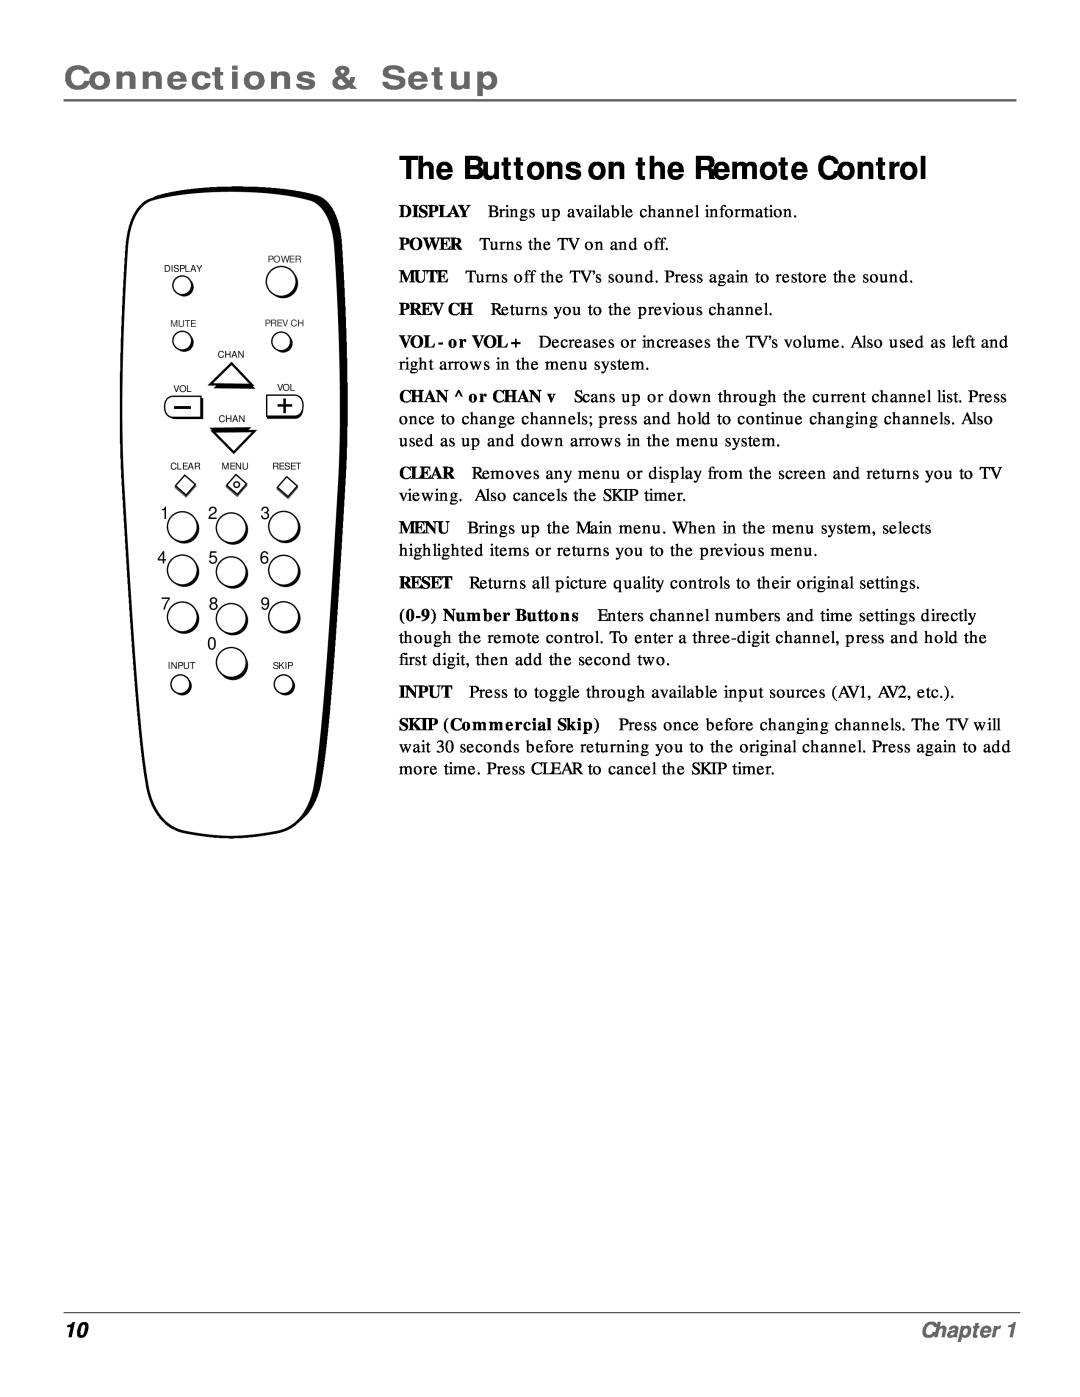 RCA CR20310 manual The Buttons on the Remote Control, Connections & Setup, Chapter, Power Display, Mute, Input, Skip 